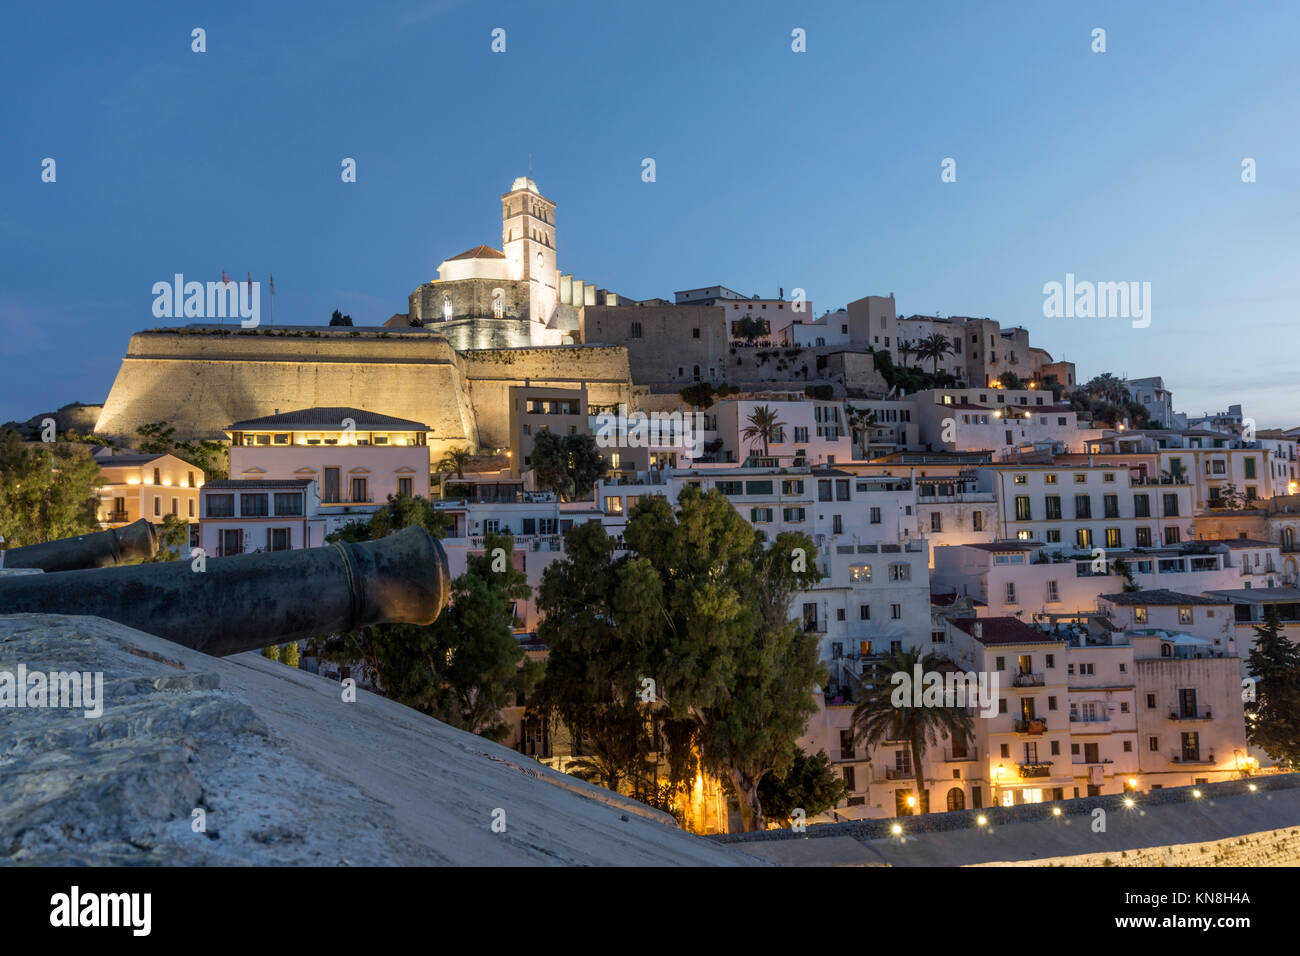 Spain, Baleares island, Ibiza, Dalt vila, sunset, overview from the fortress Stock Photo